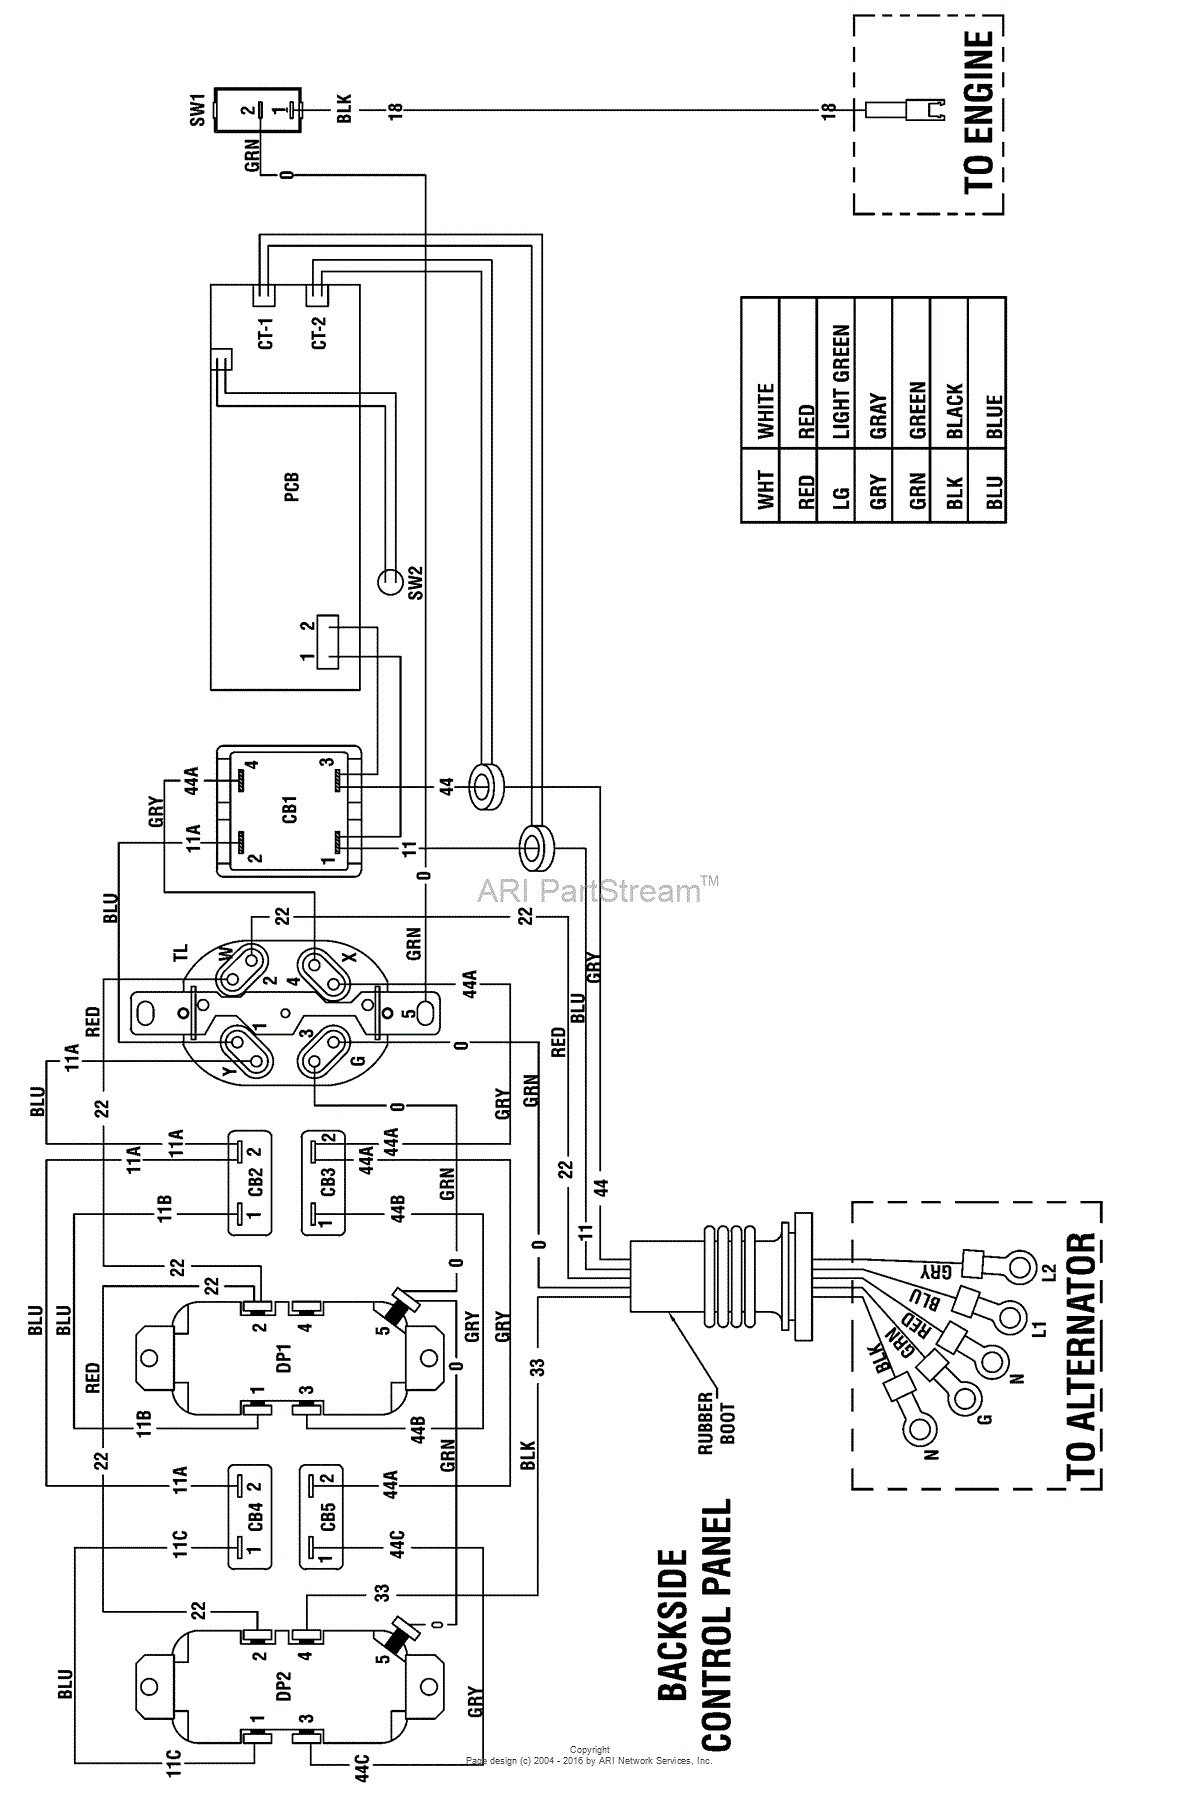 Briggs Stratton Wiring Diagram And Coil | Wiring Diagram - Briggs And Stratton Ignition Coil Wiring Diagram